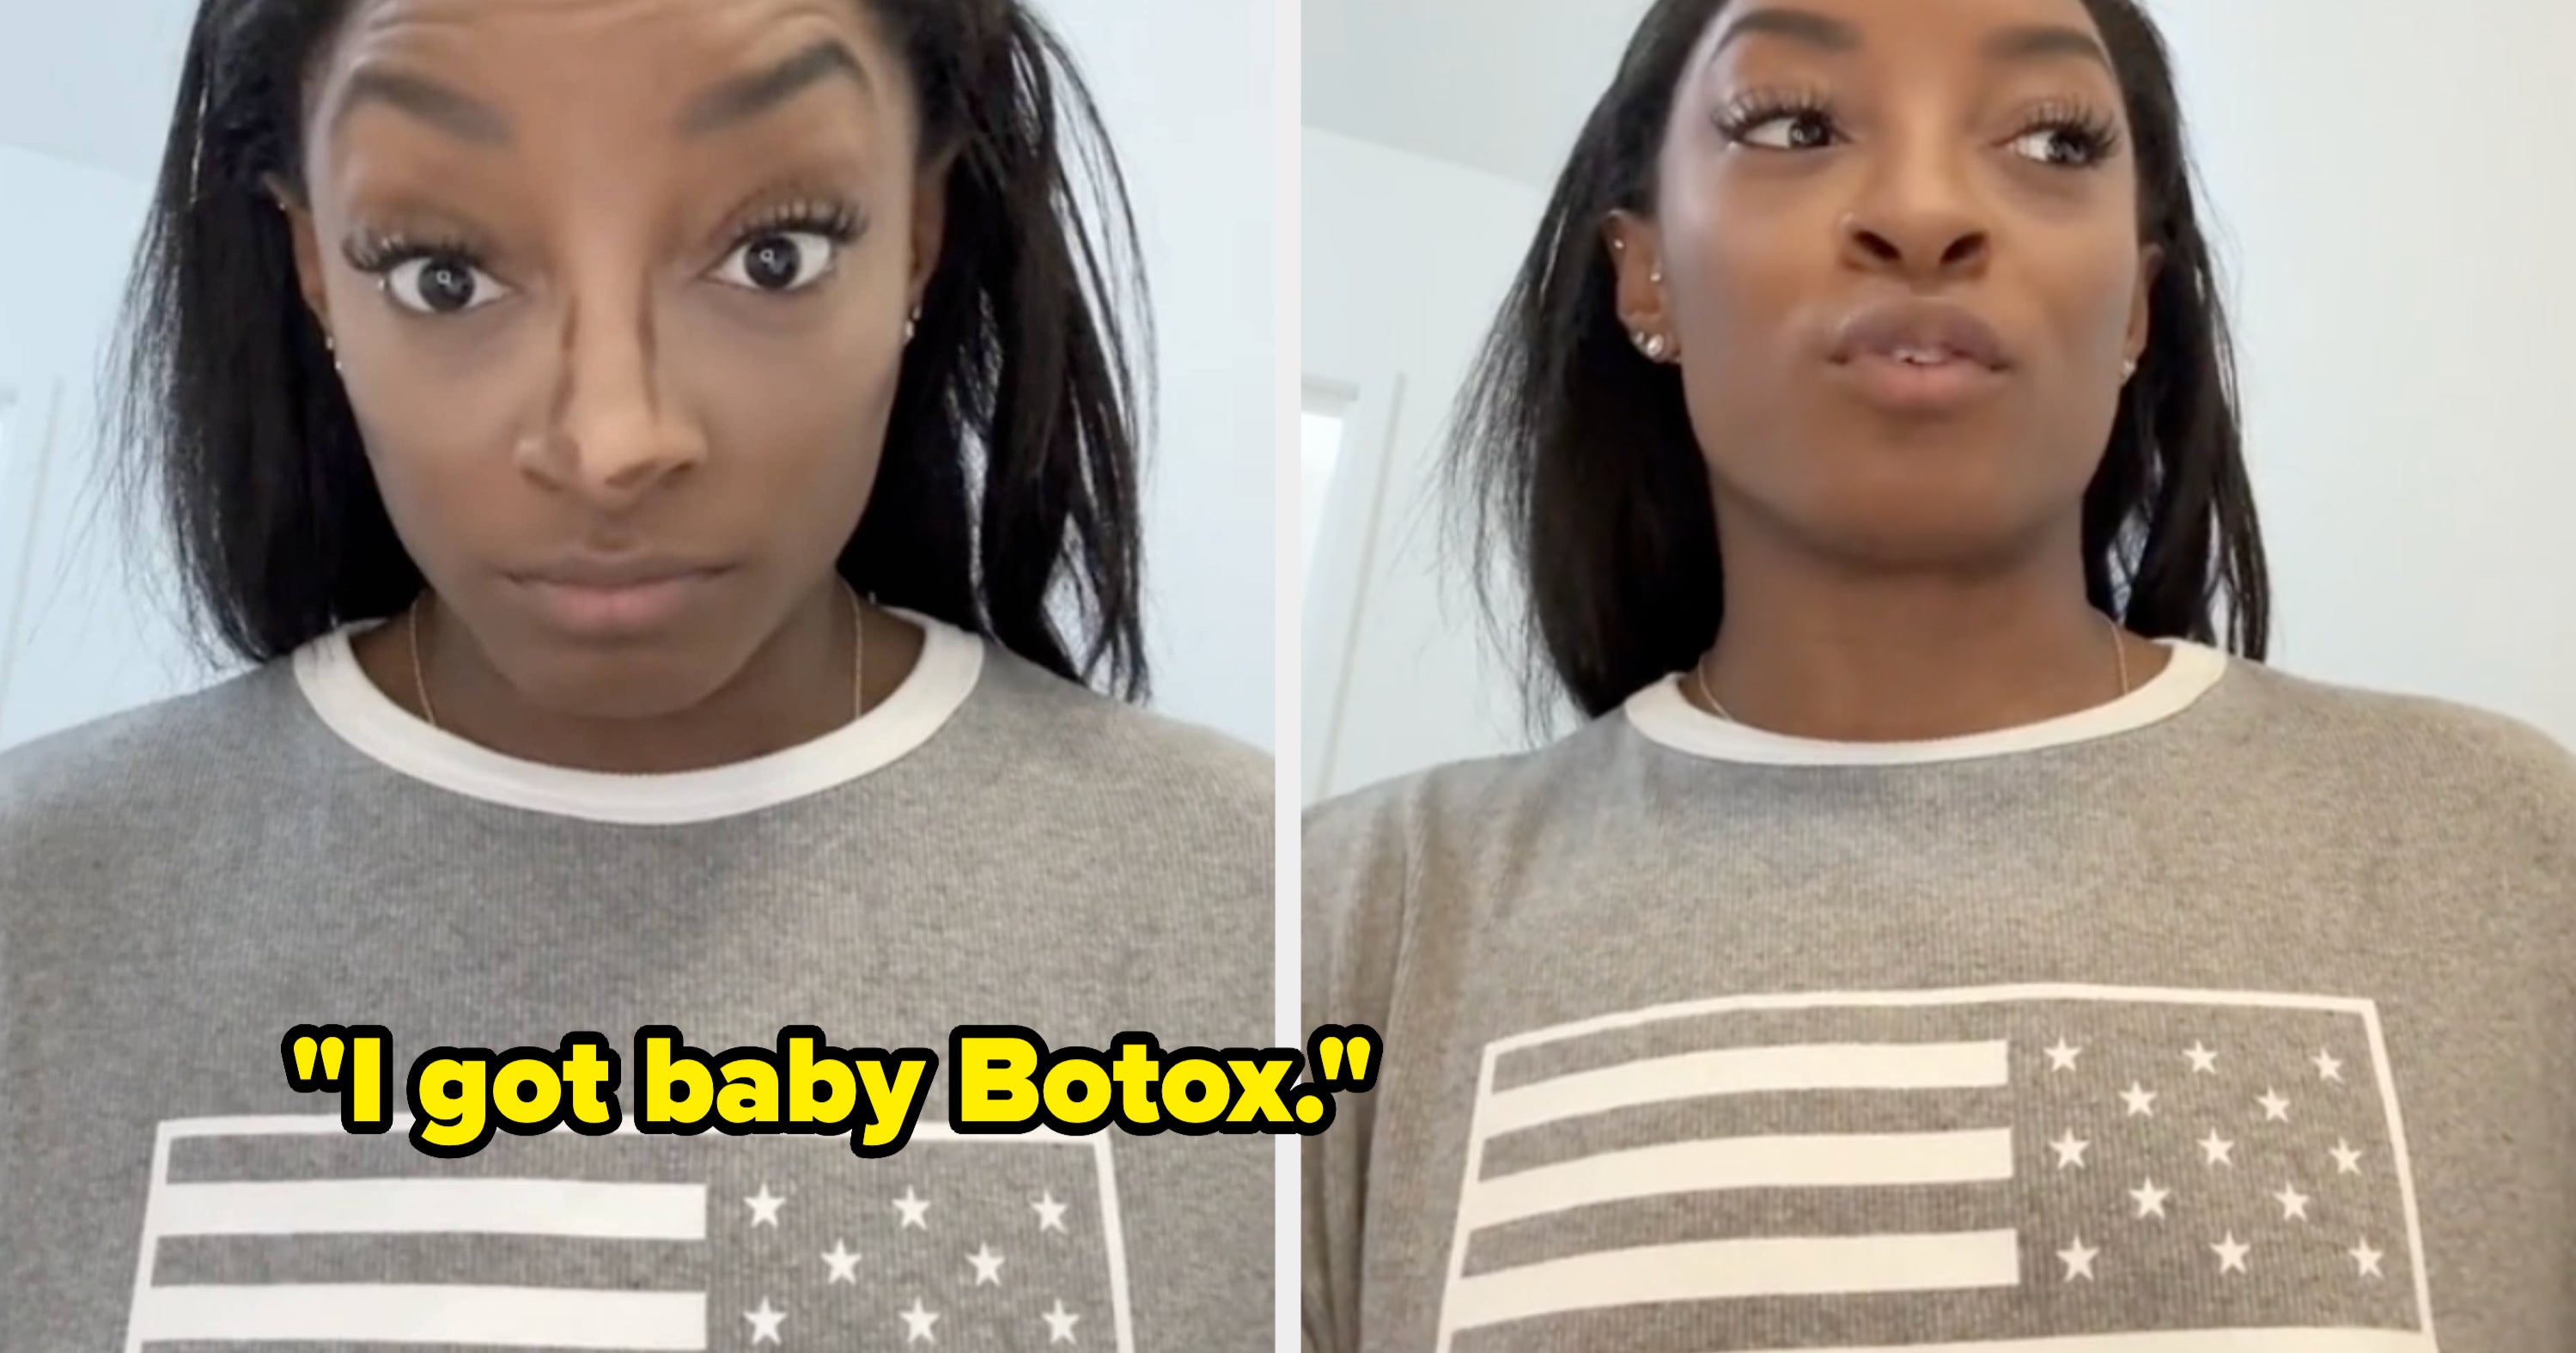 Simone Biles Discussed Her Experience With Botox